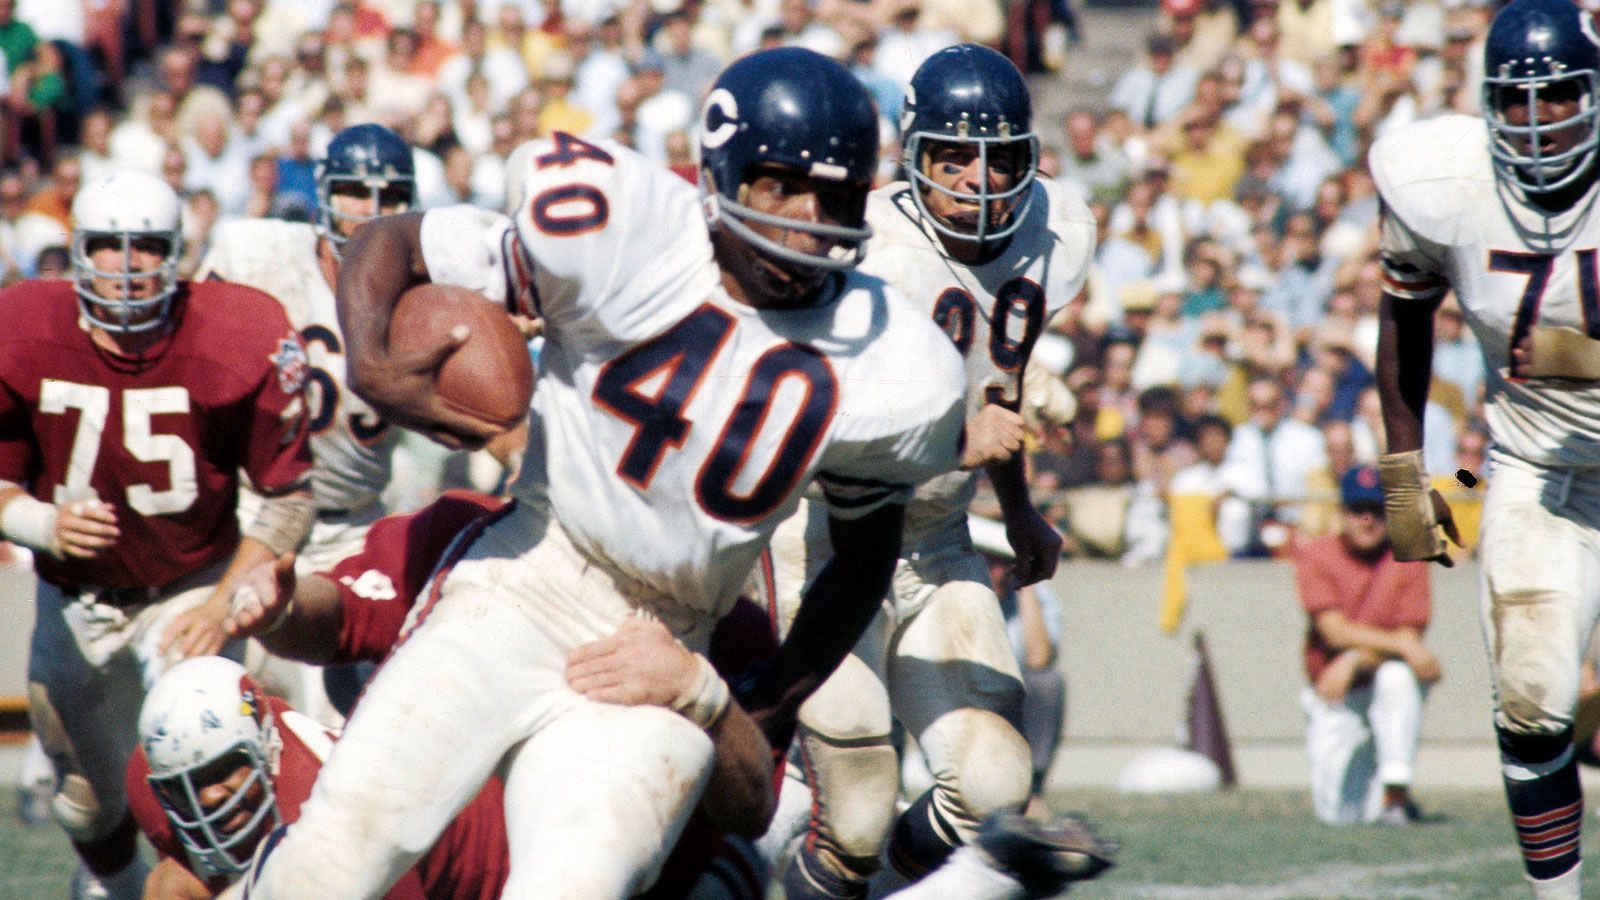 <strong>40: Gale Sayers</strong><br>Team: Chicago Bears<br>Position: Running Back<br>Erfolge: Pro Football Hall of Famer, fünfmaliger All-Pro, viermaliger Pro Bowler<br>Honorable Mentions: Elroy Hirsch, Mike Alstott
